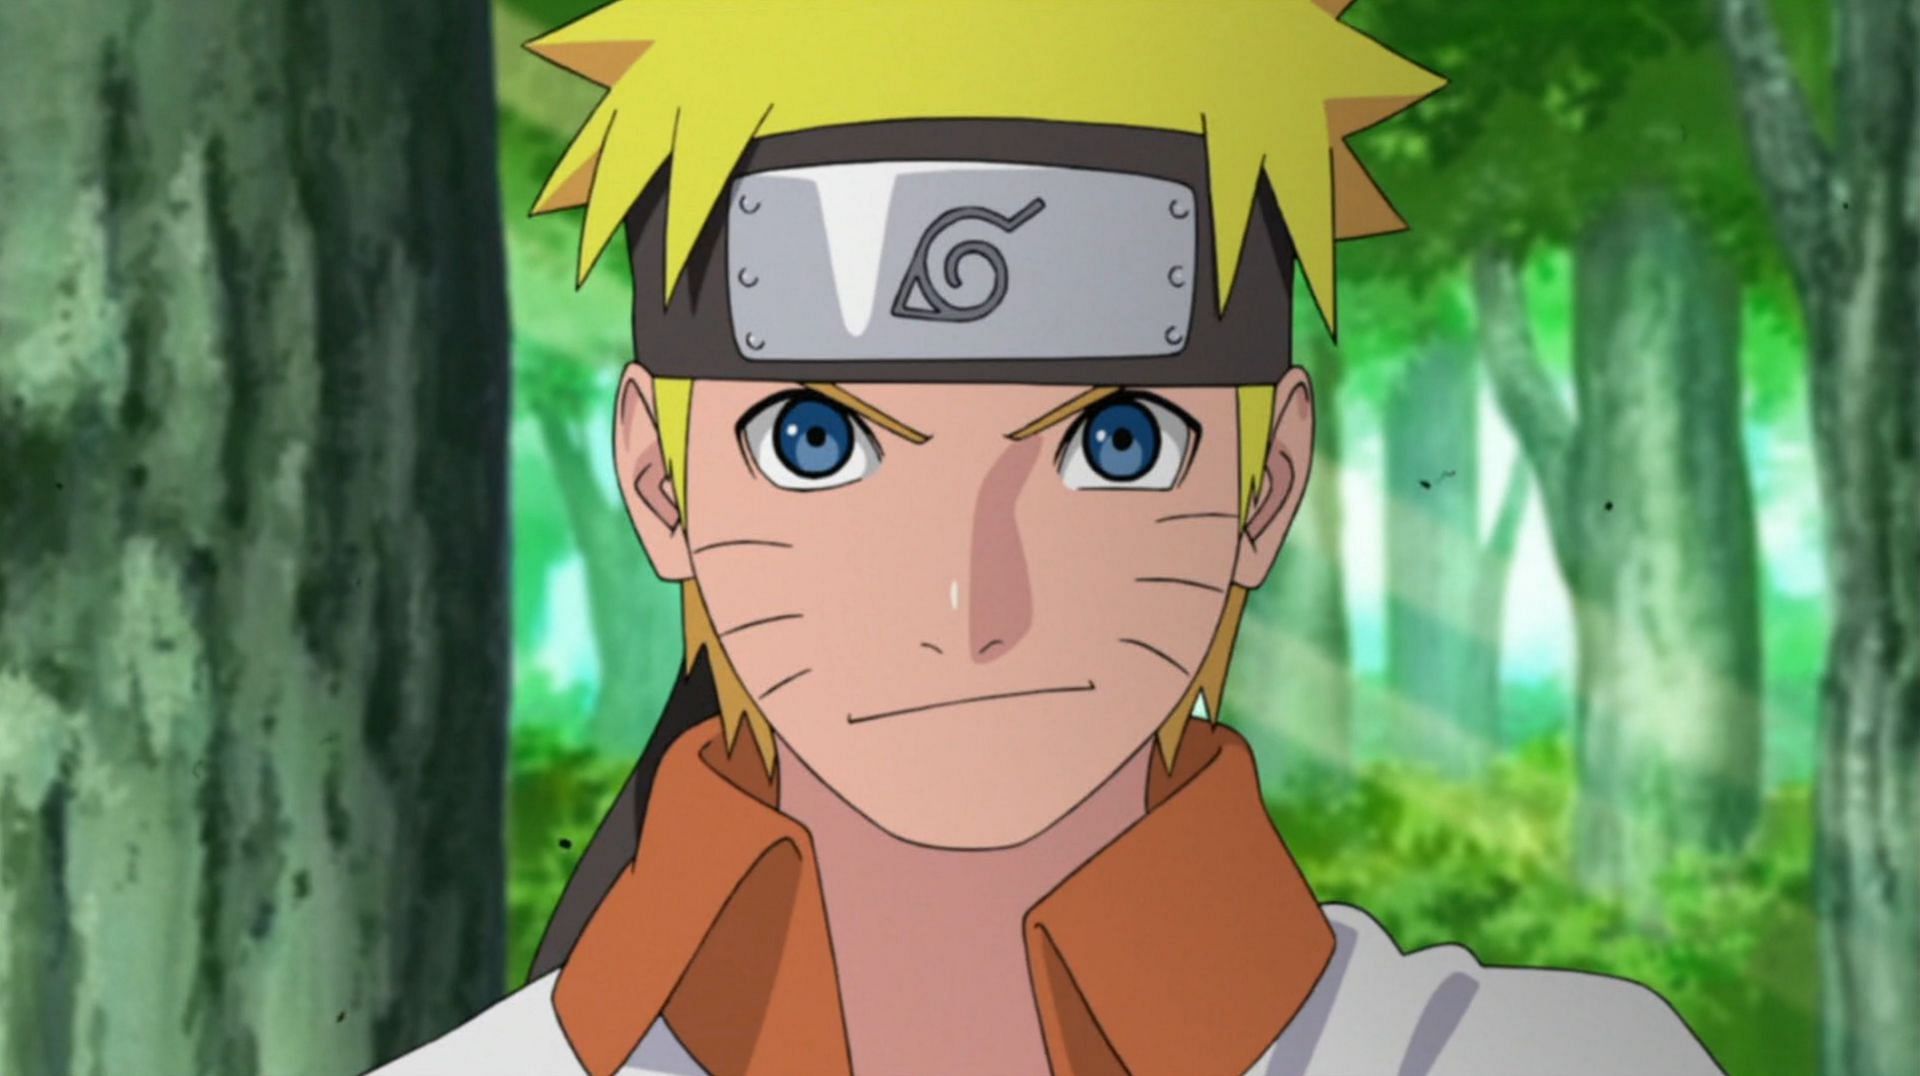 The series protagonist as seen in the anime (Image via Studio Pierrot)